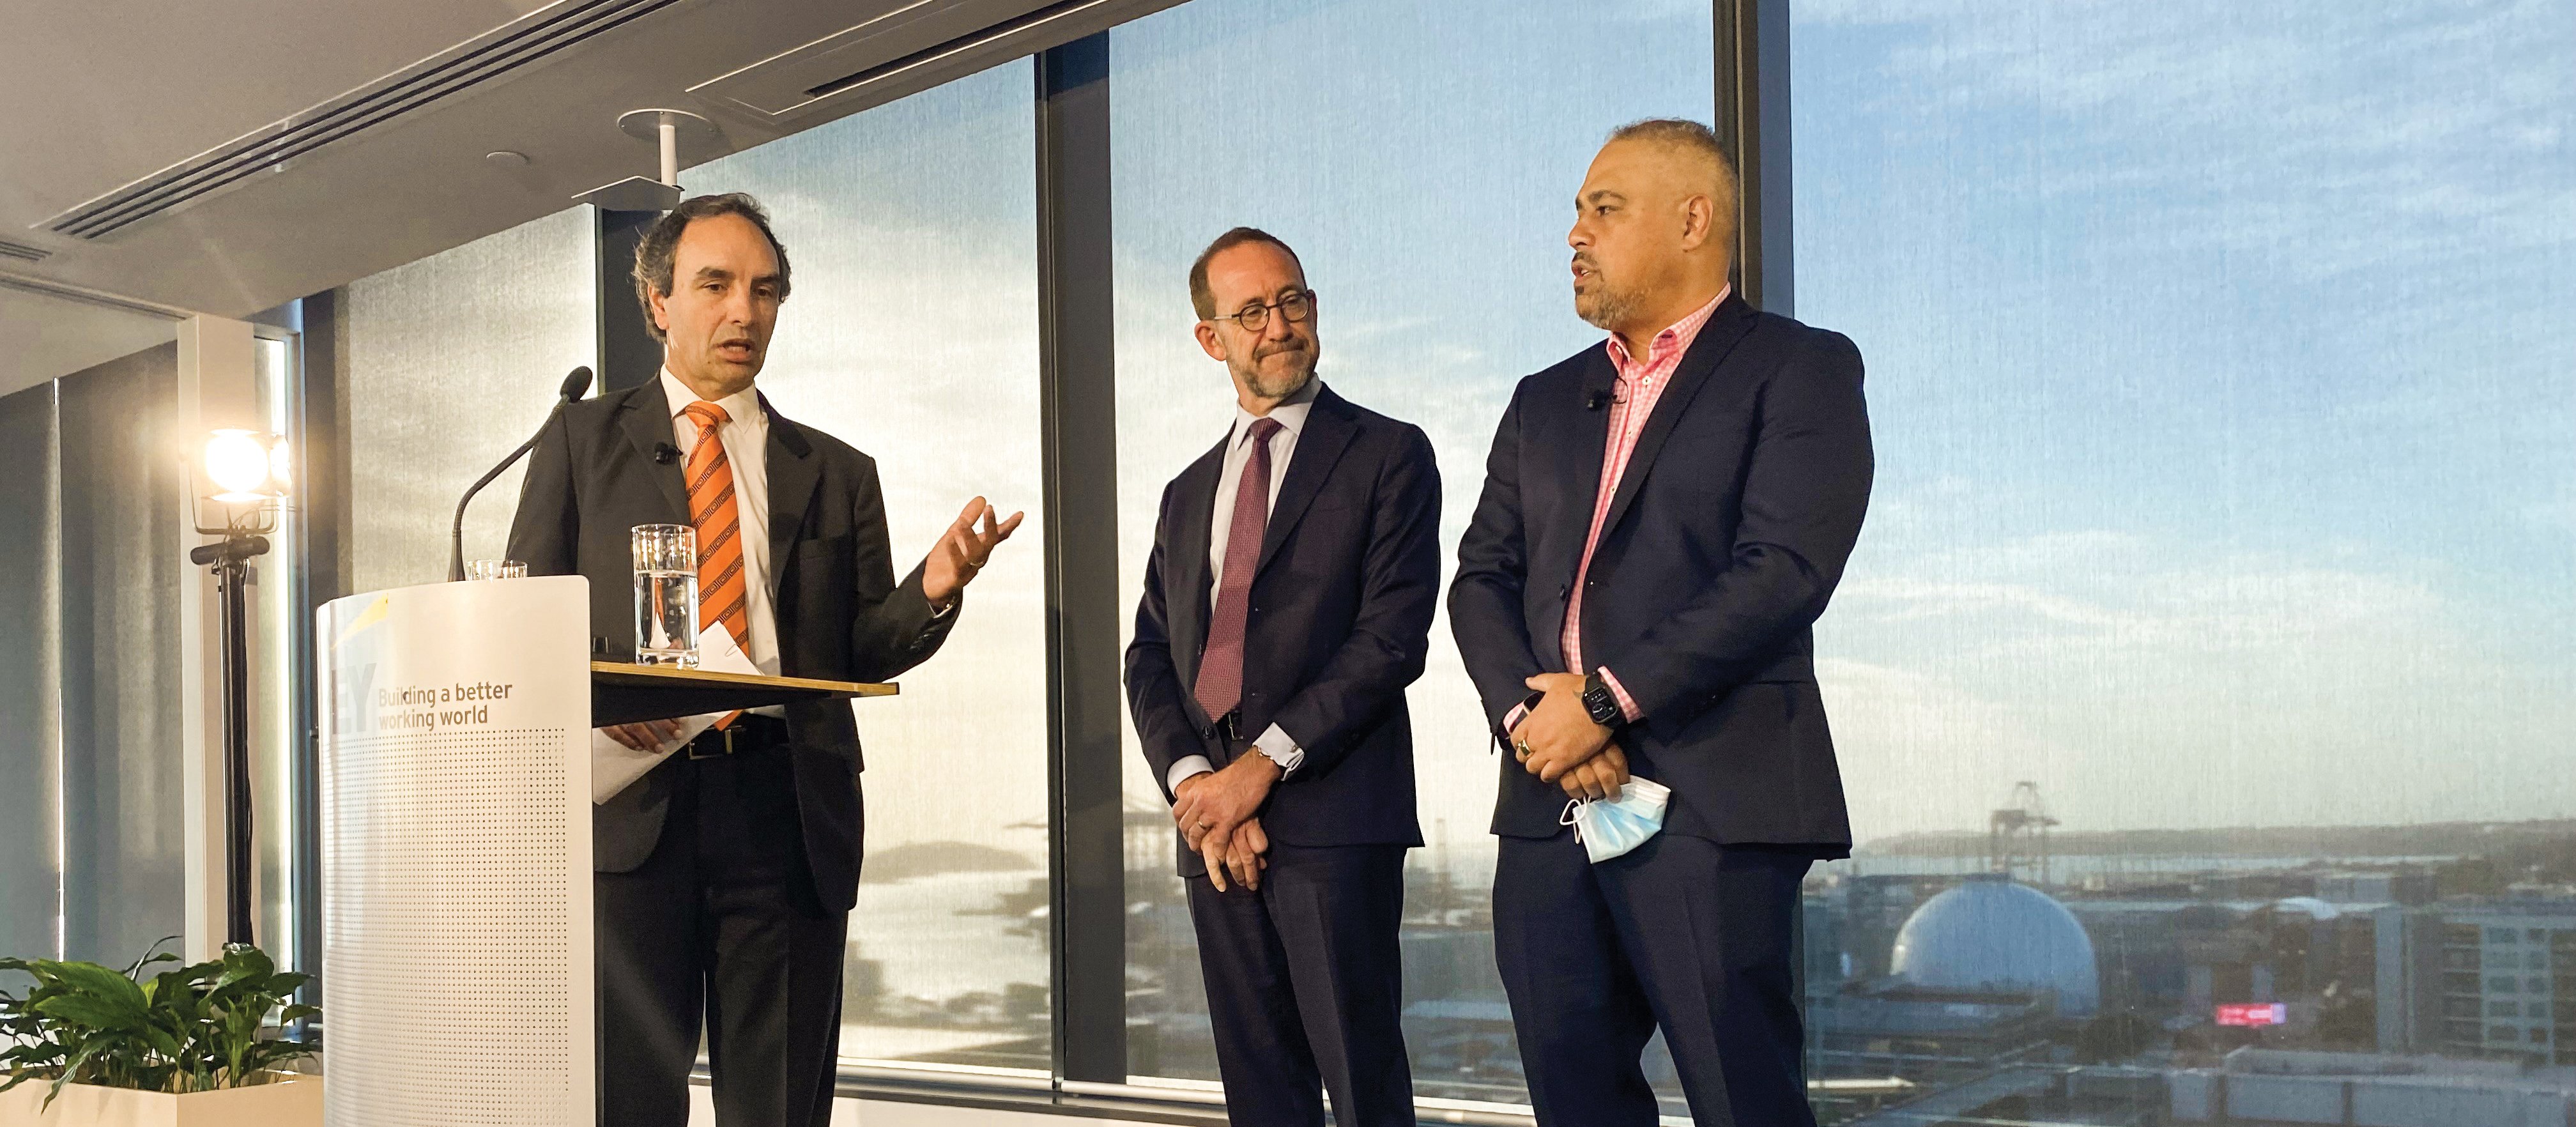 Chad Paraone, deputy commissioner at Waikato DHB, with health minister Andrew Little and associate health minister Peeni Henare, address a post-Budget meeting in Auckland on 20 May